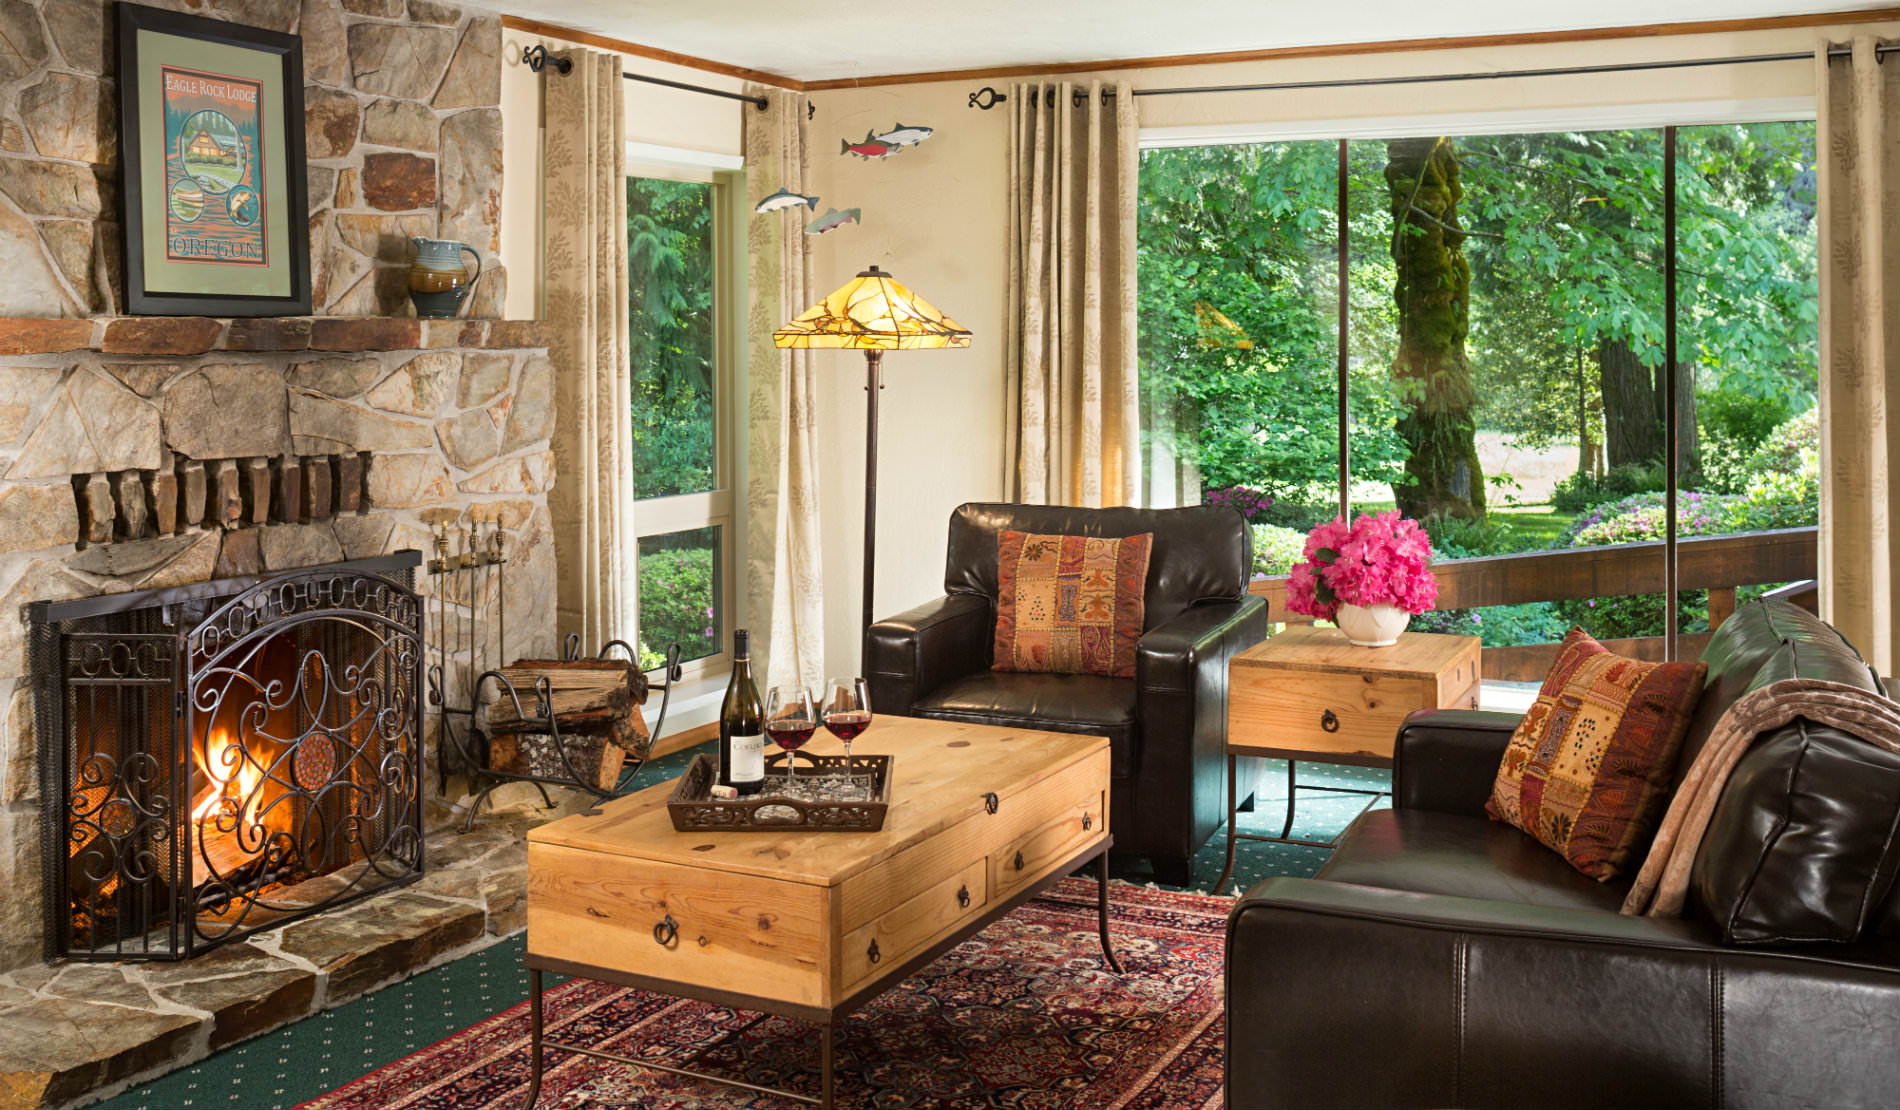 Large stone fireplace facing two leather club chairs with large windows viewing greenery outside.